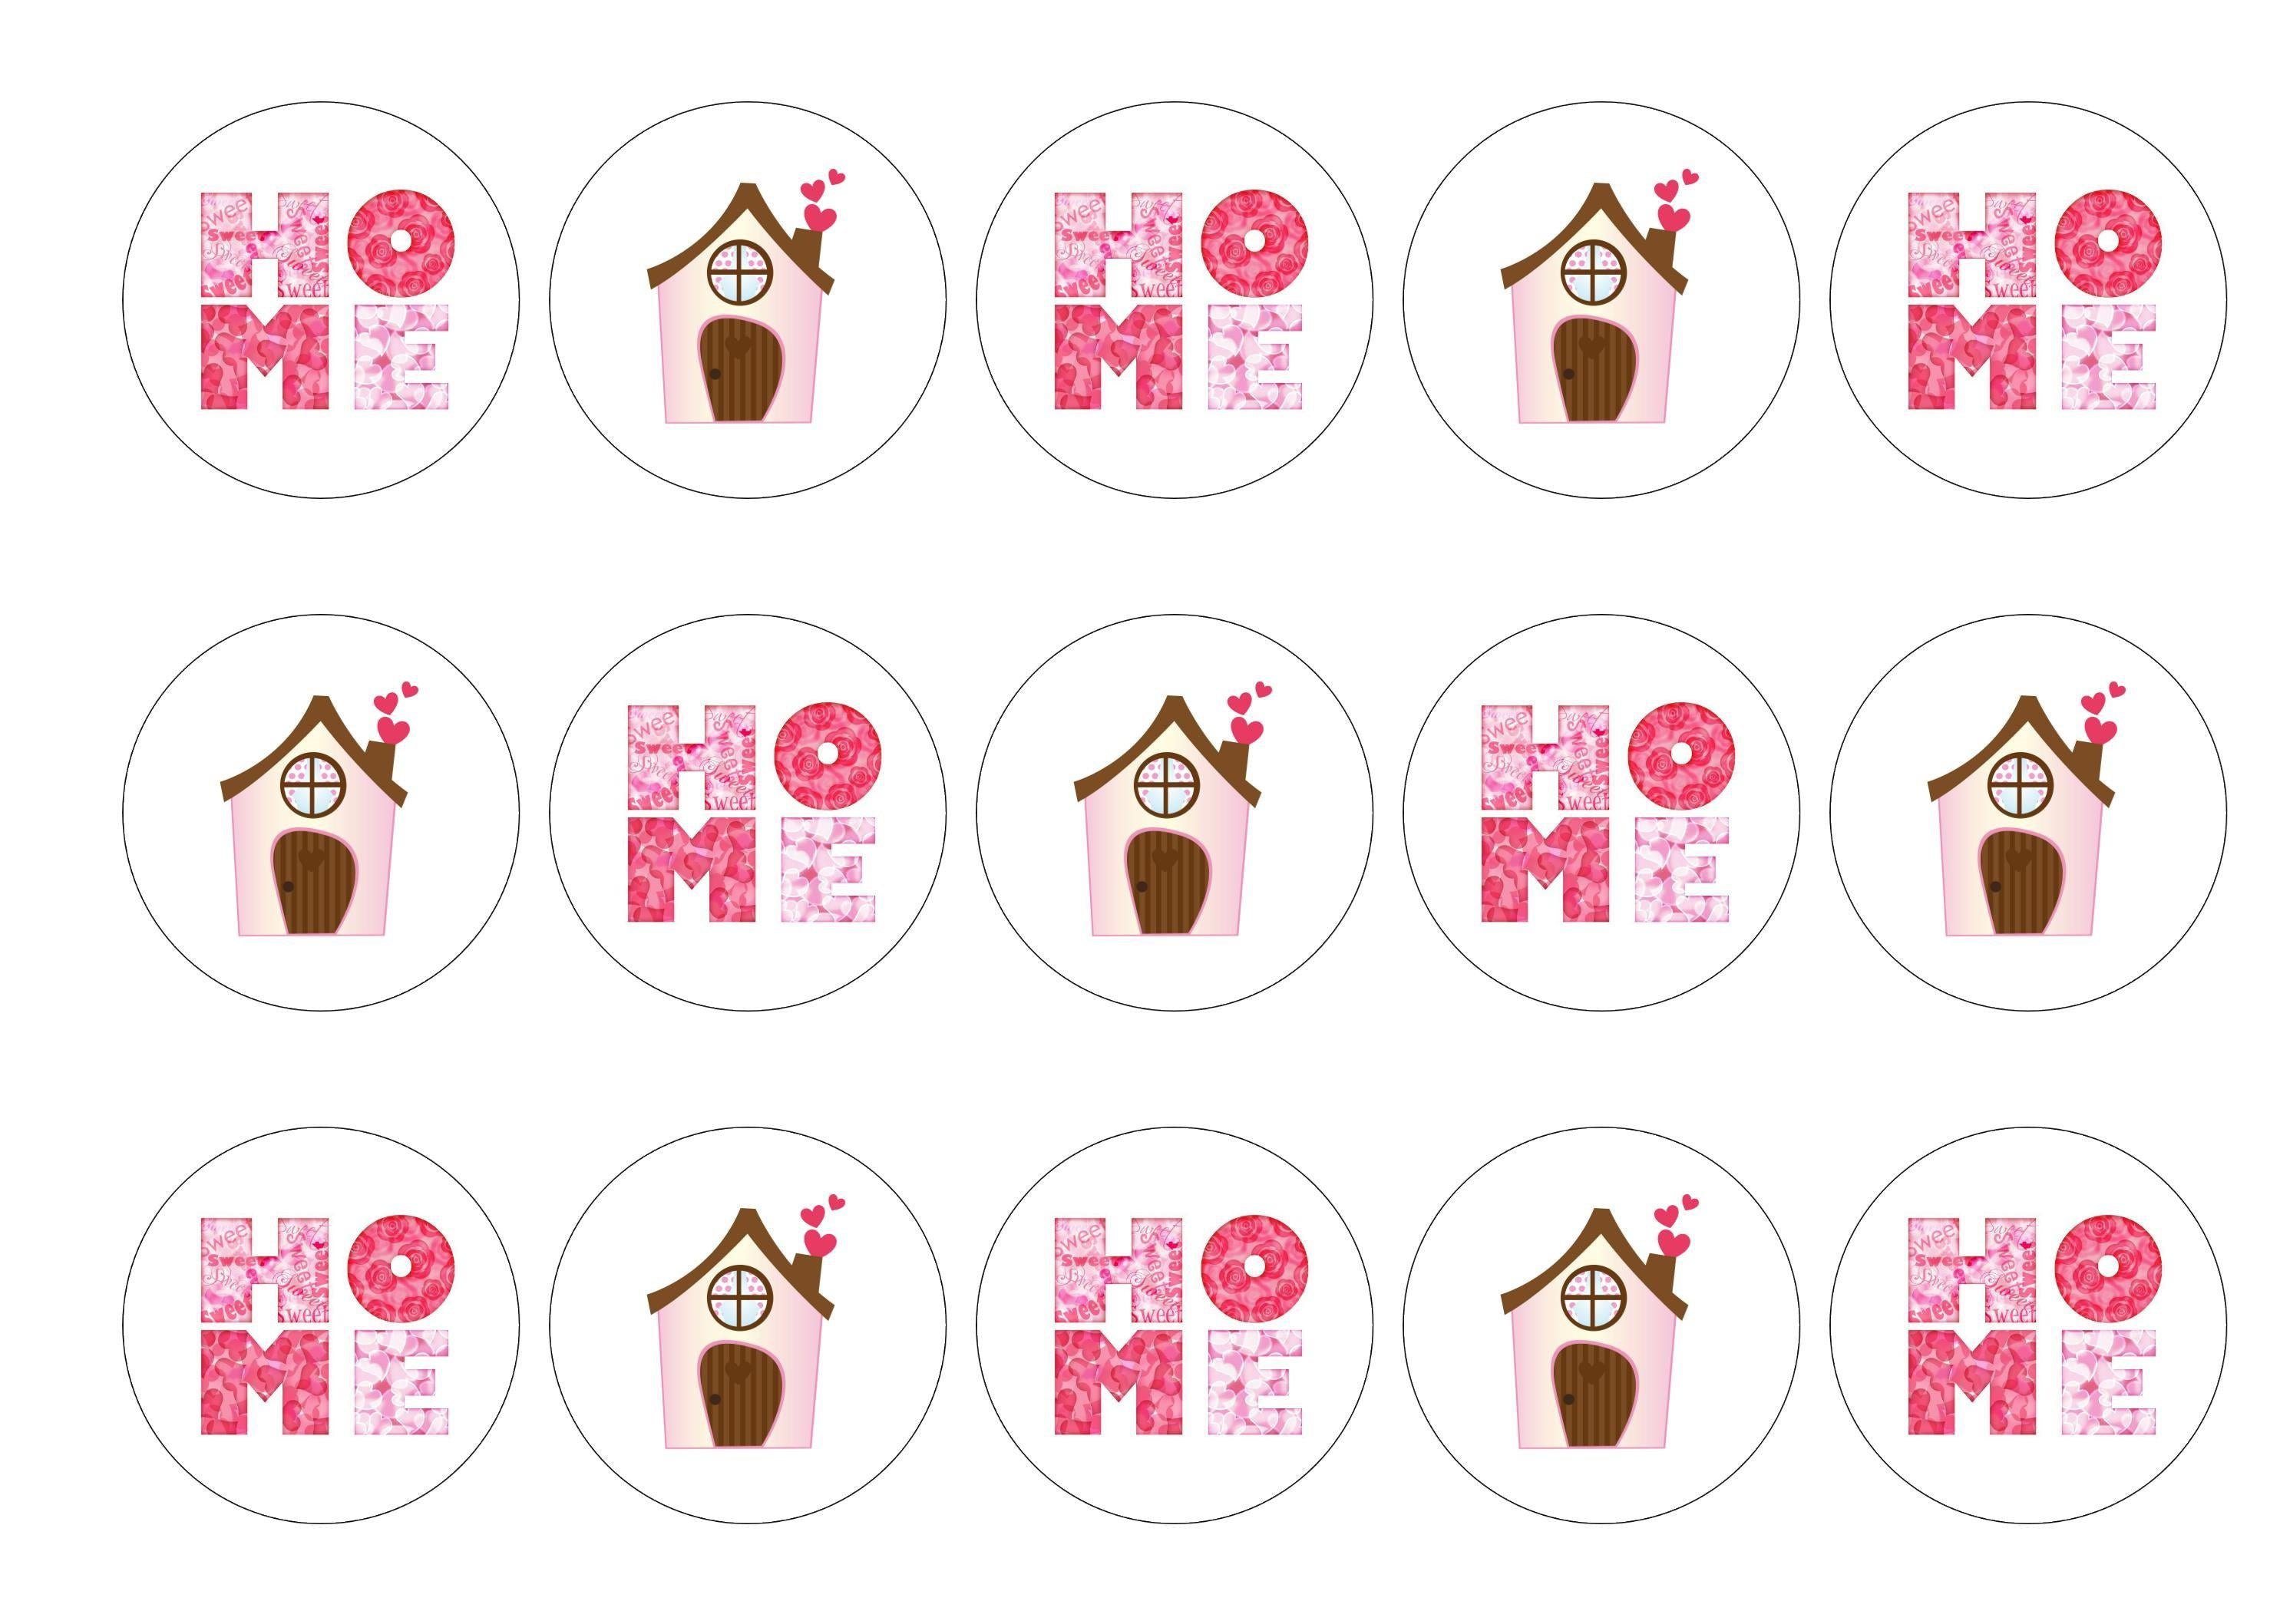 Edible paper cupcake toppers for house warming